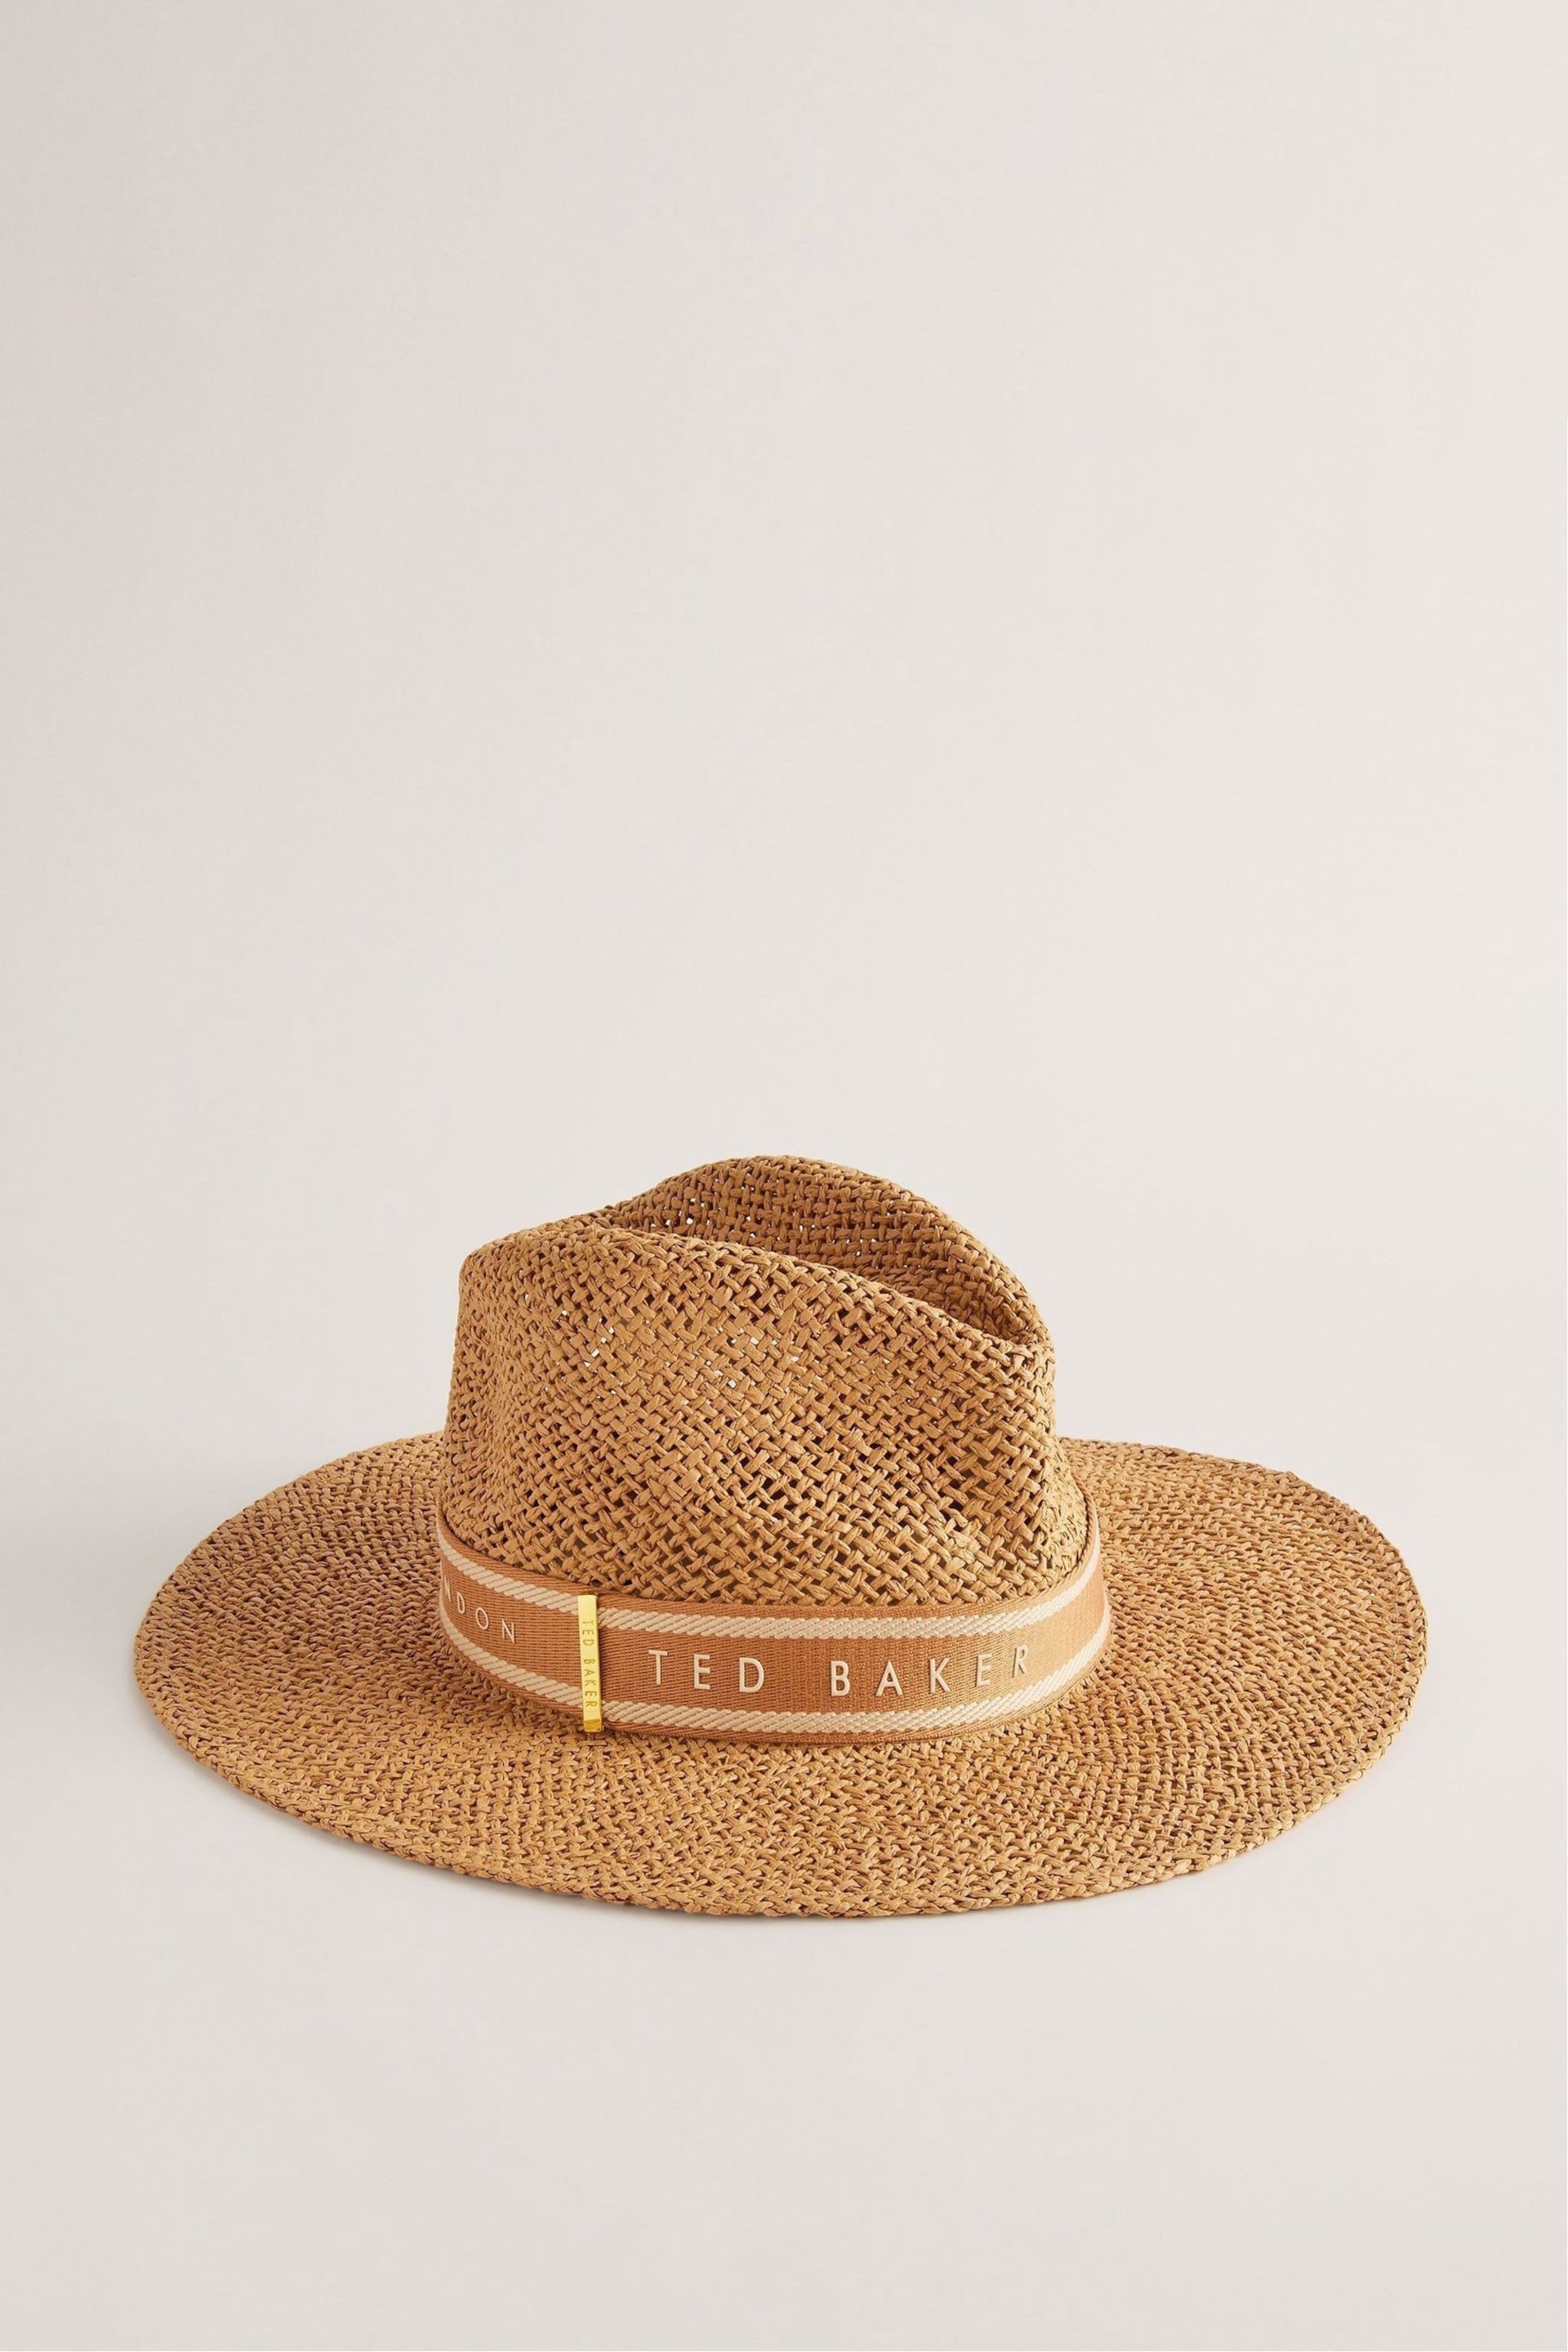 Ted Baker Natural Clairie Faux Straw Fedora Hat - Image 1 of 3